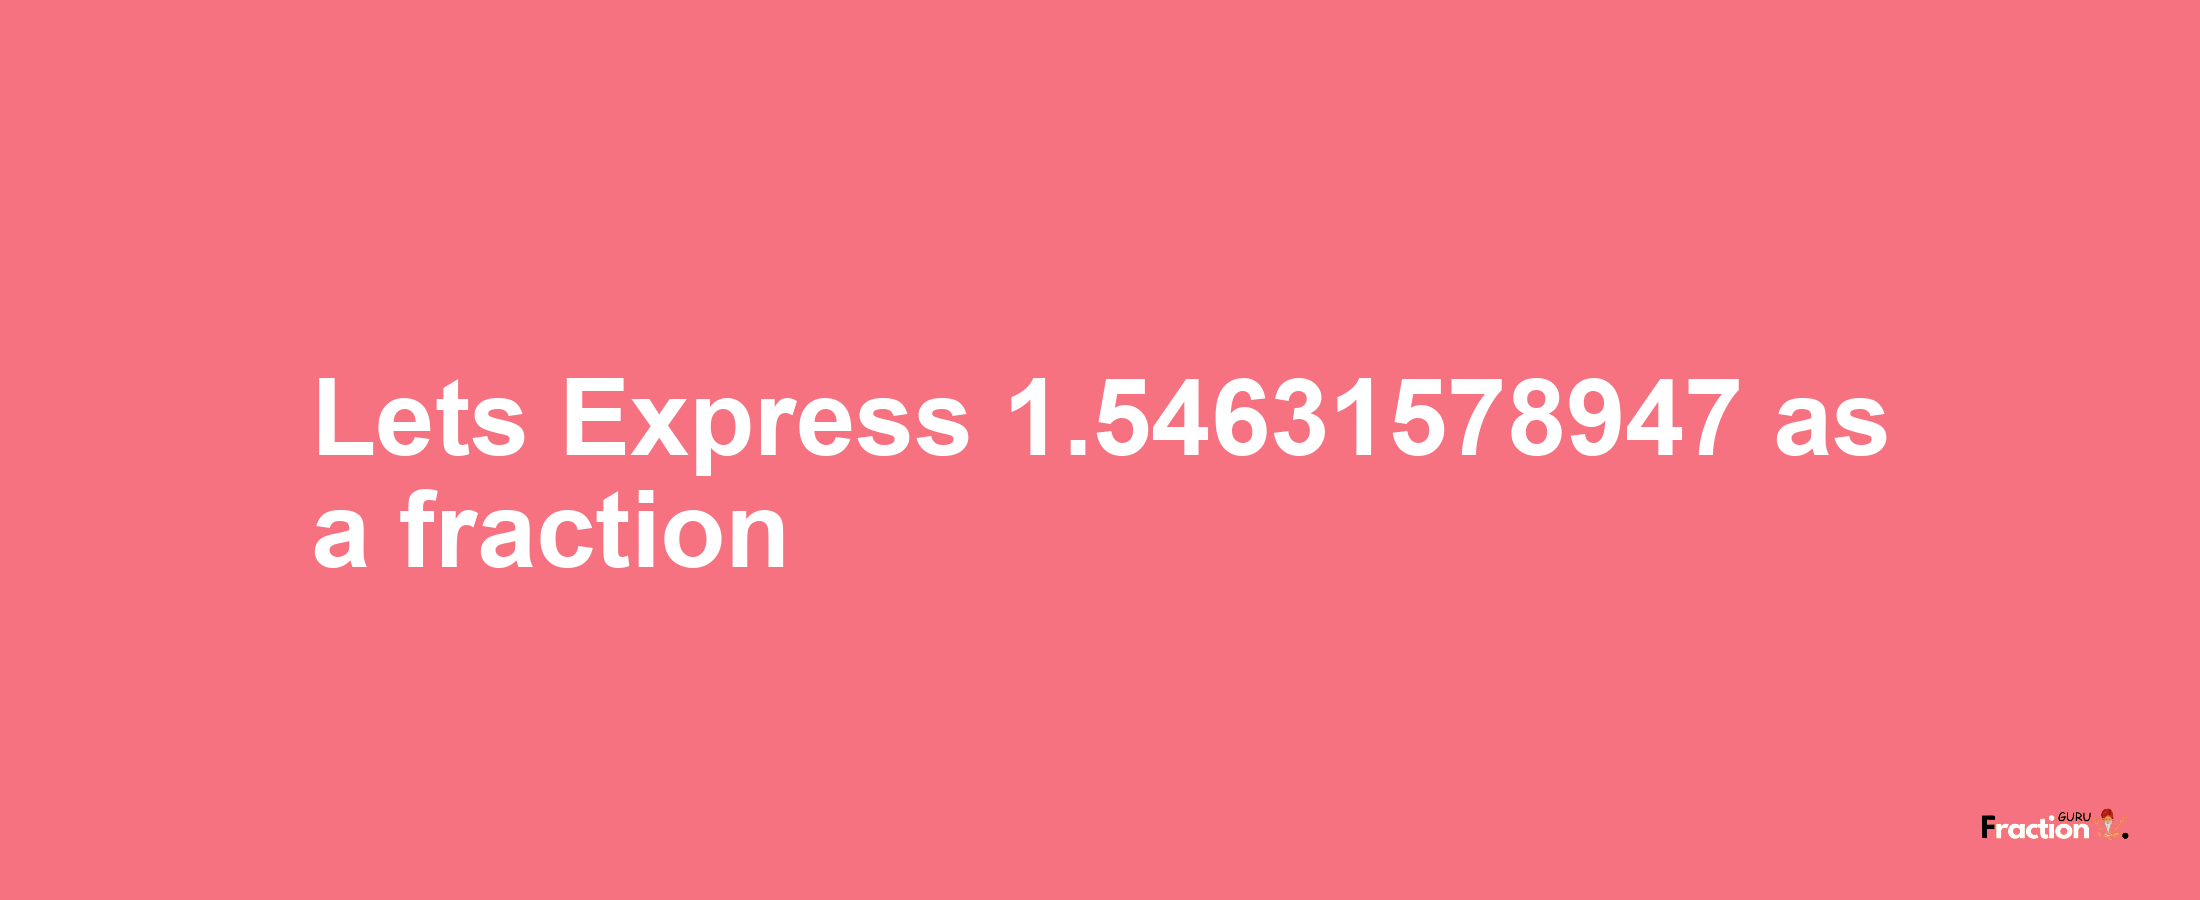 Lets Express 1.54631578947 as afraction